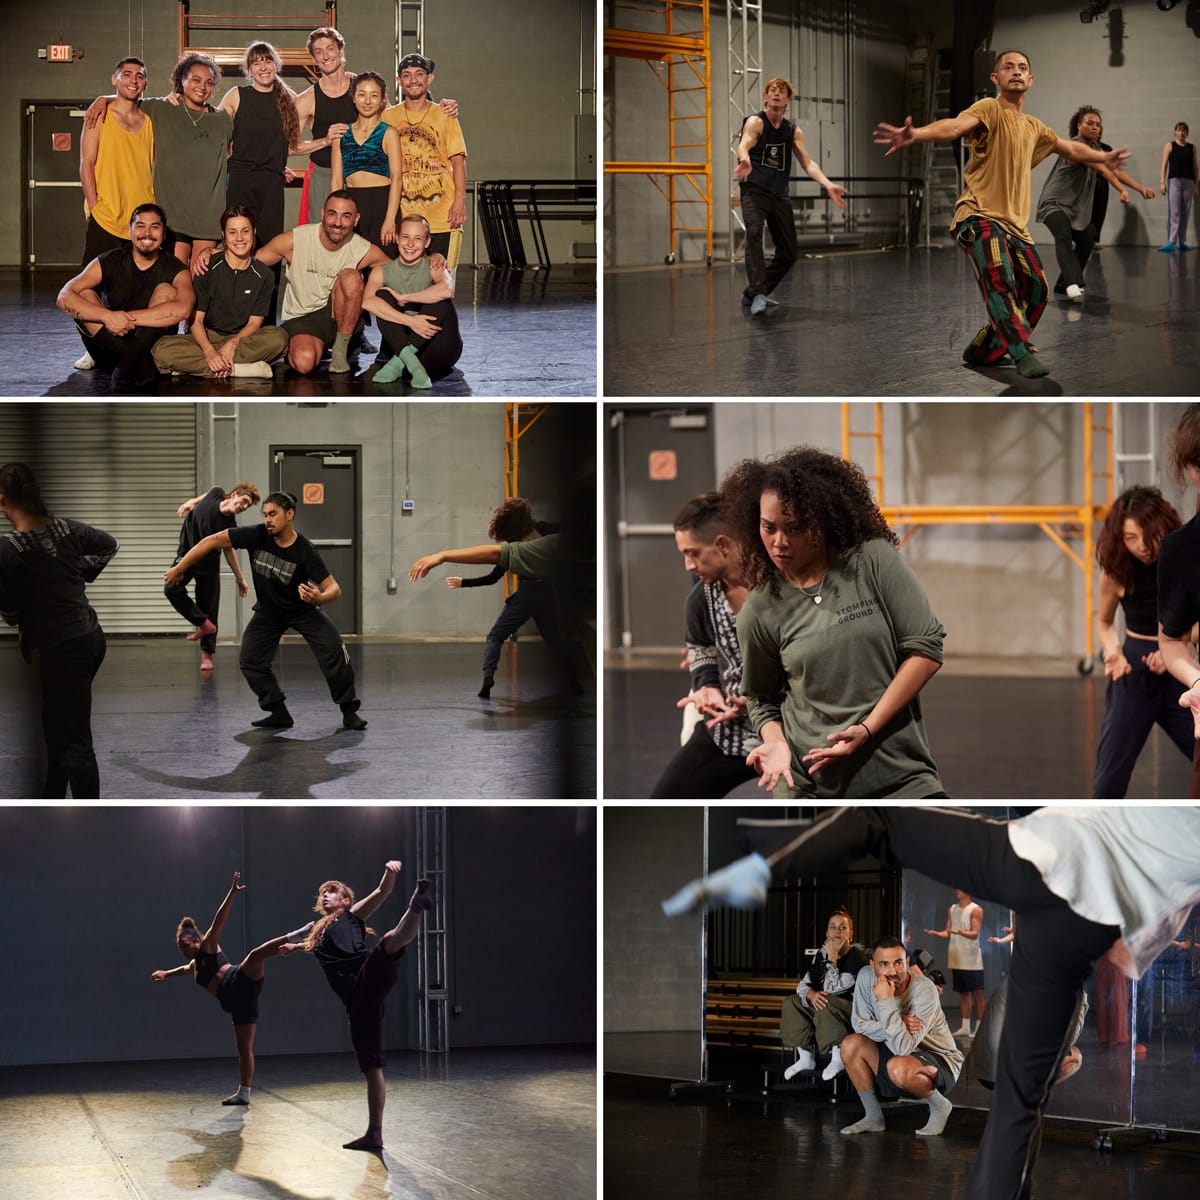 Various scenes from rehearsals